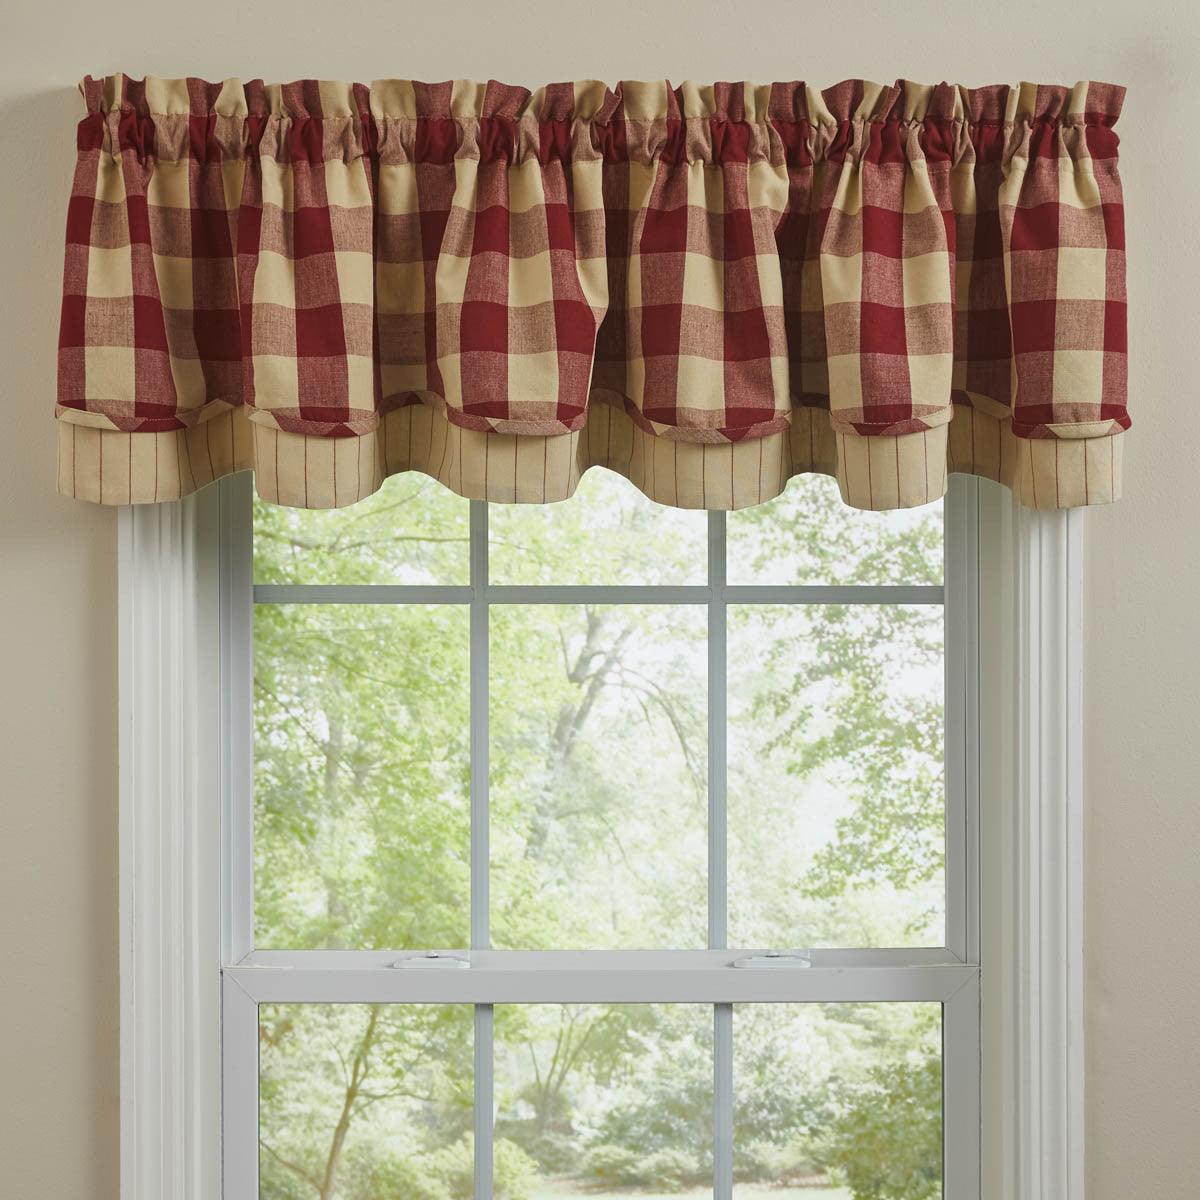 Wicklow Check Valance - Lined Layered Garnet Park Designs - The Fox Decor